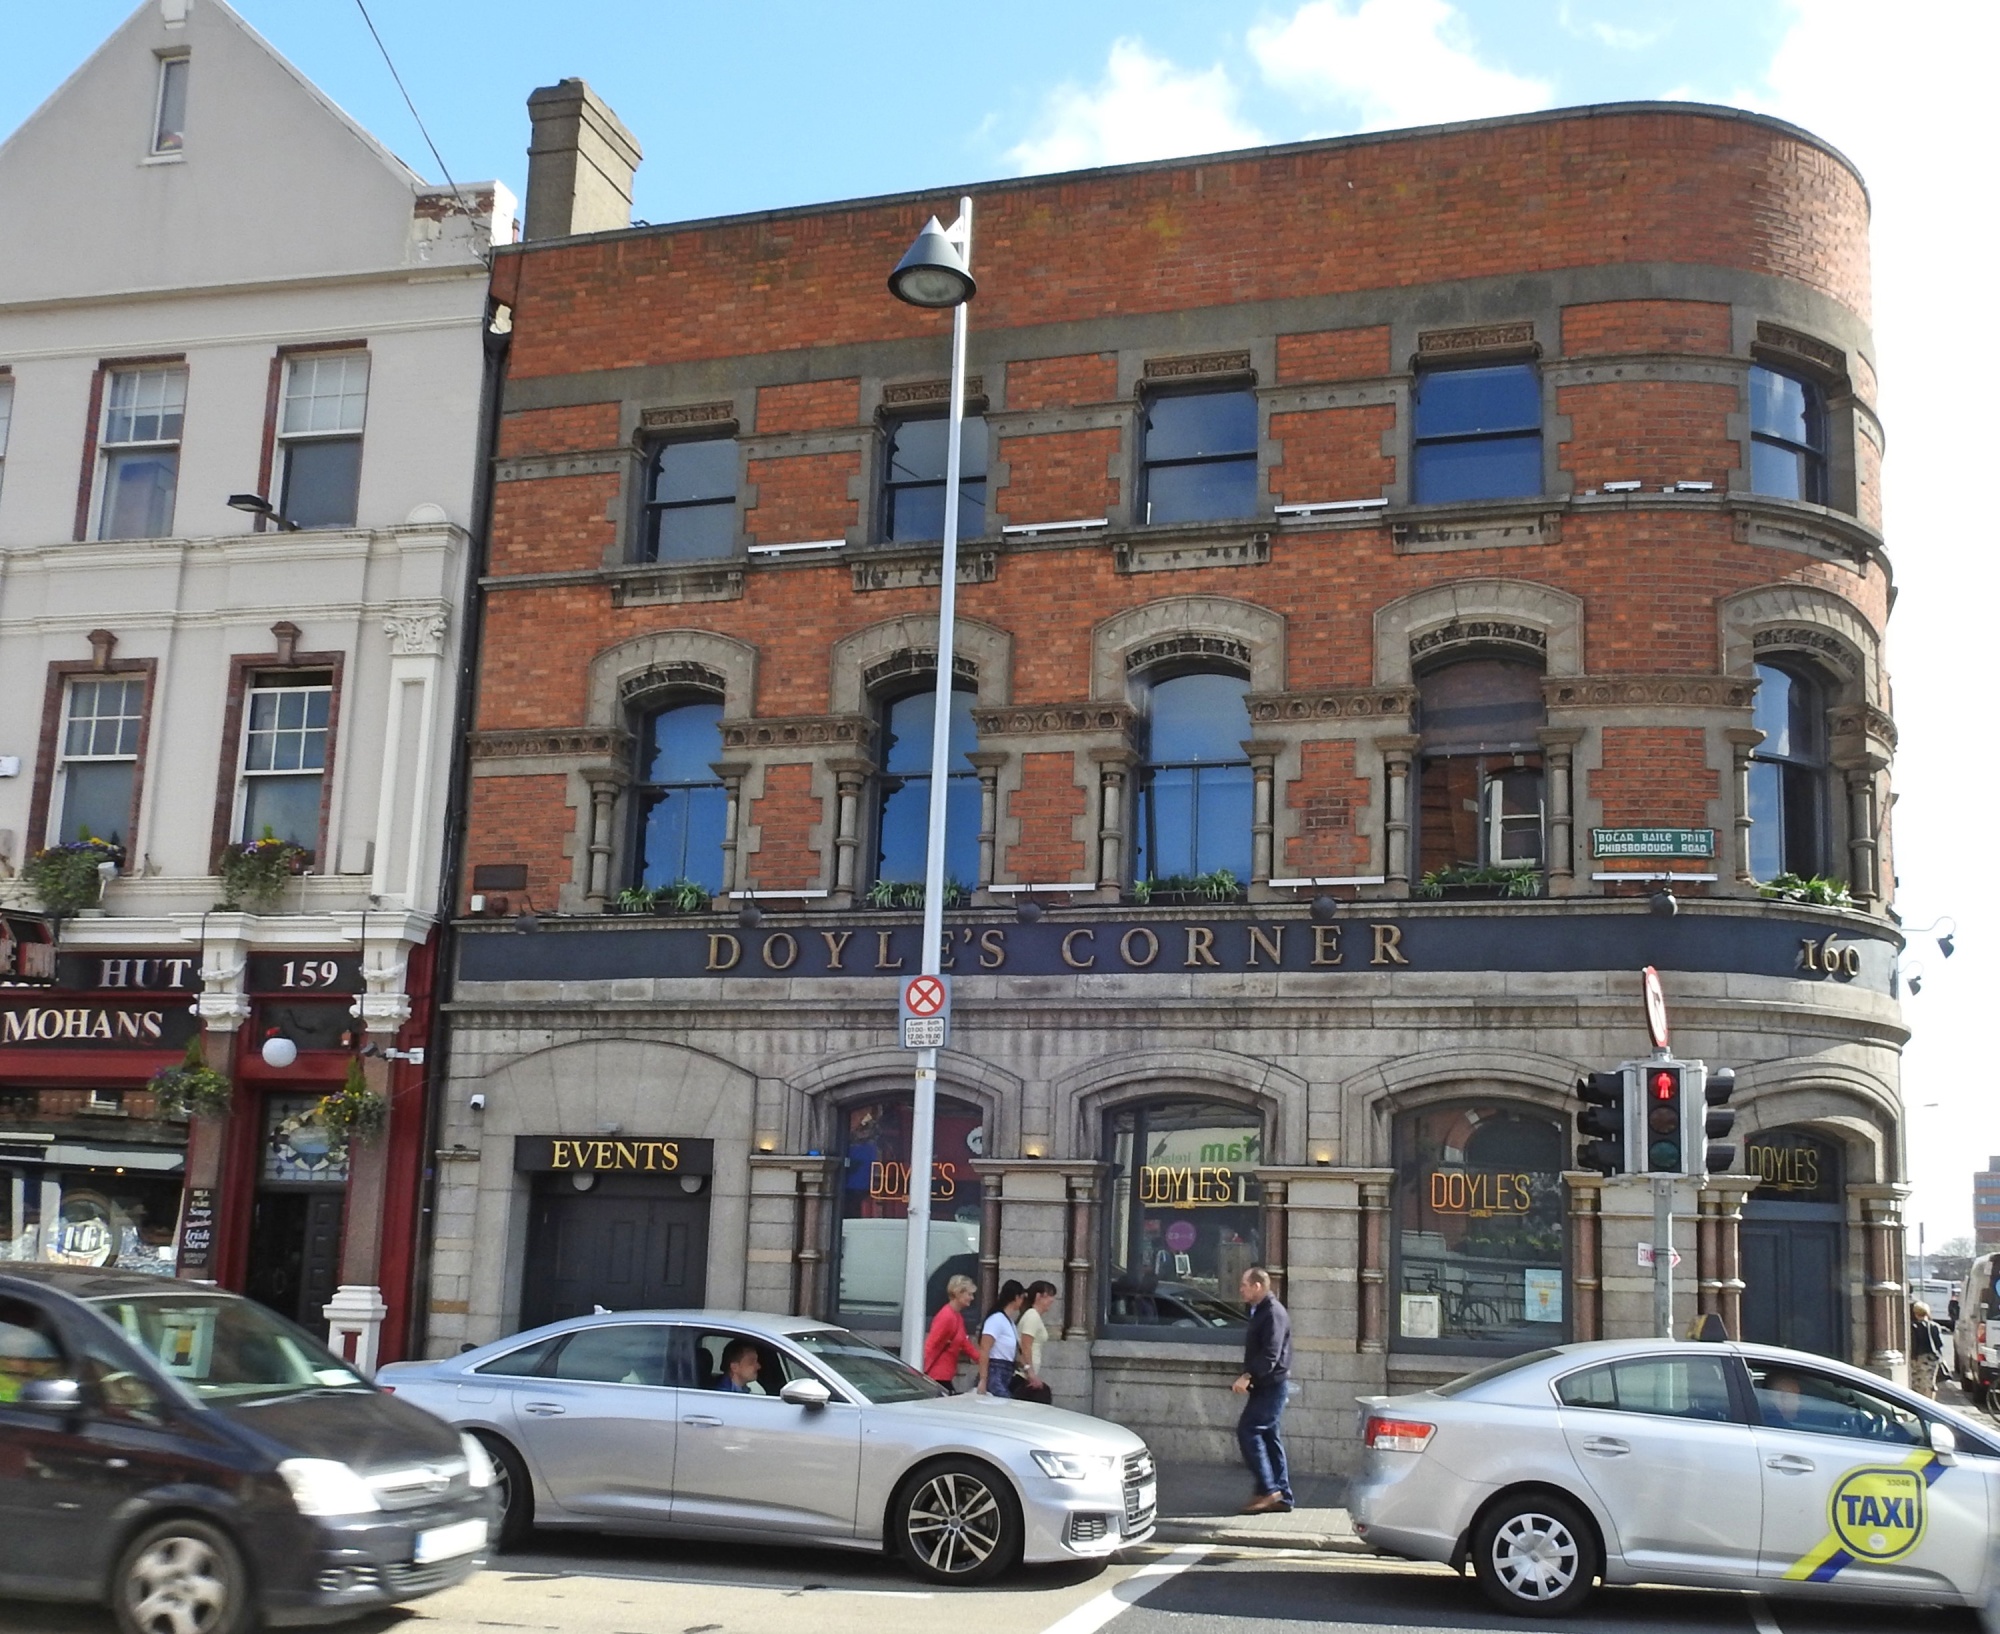 Dublin Pub Doyle’s Corner Says ‘Bring Your Coat’ for Discount on Low ...